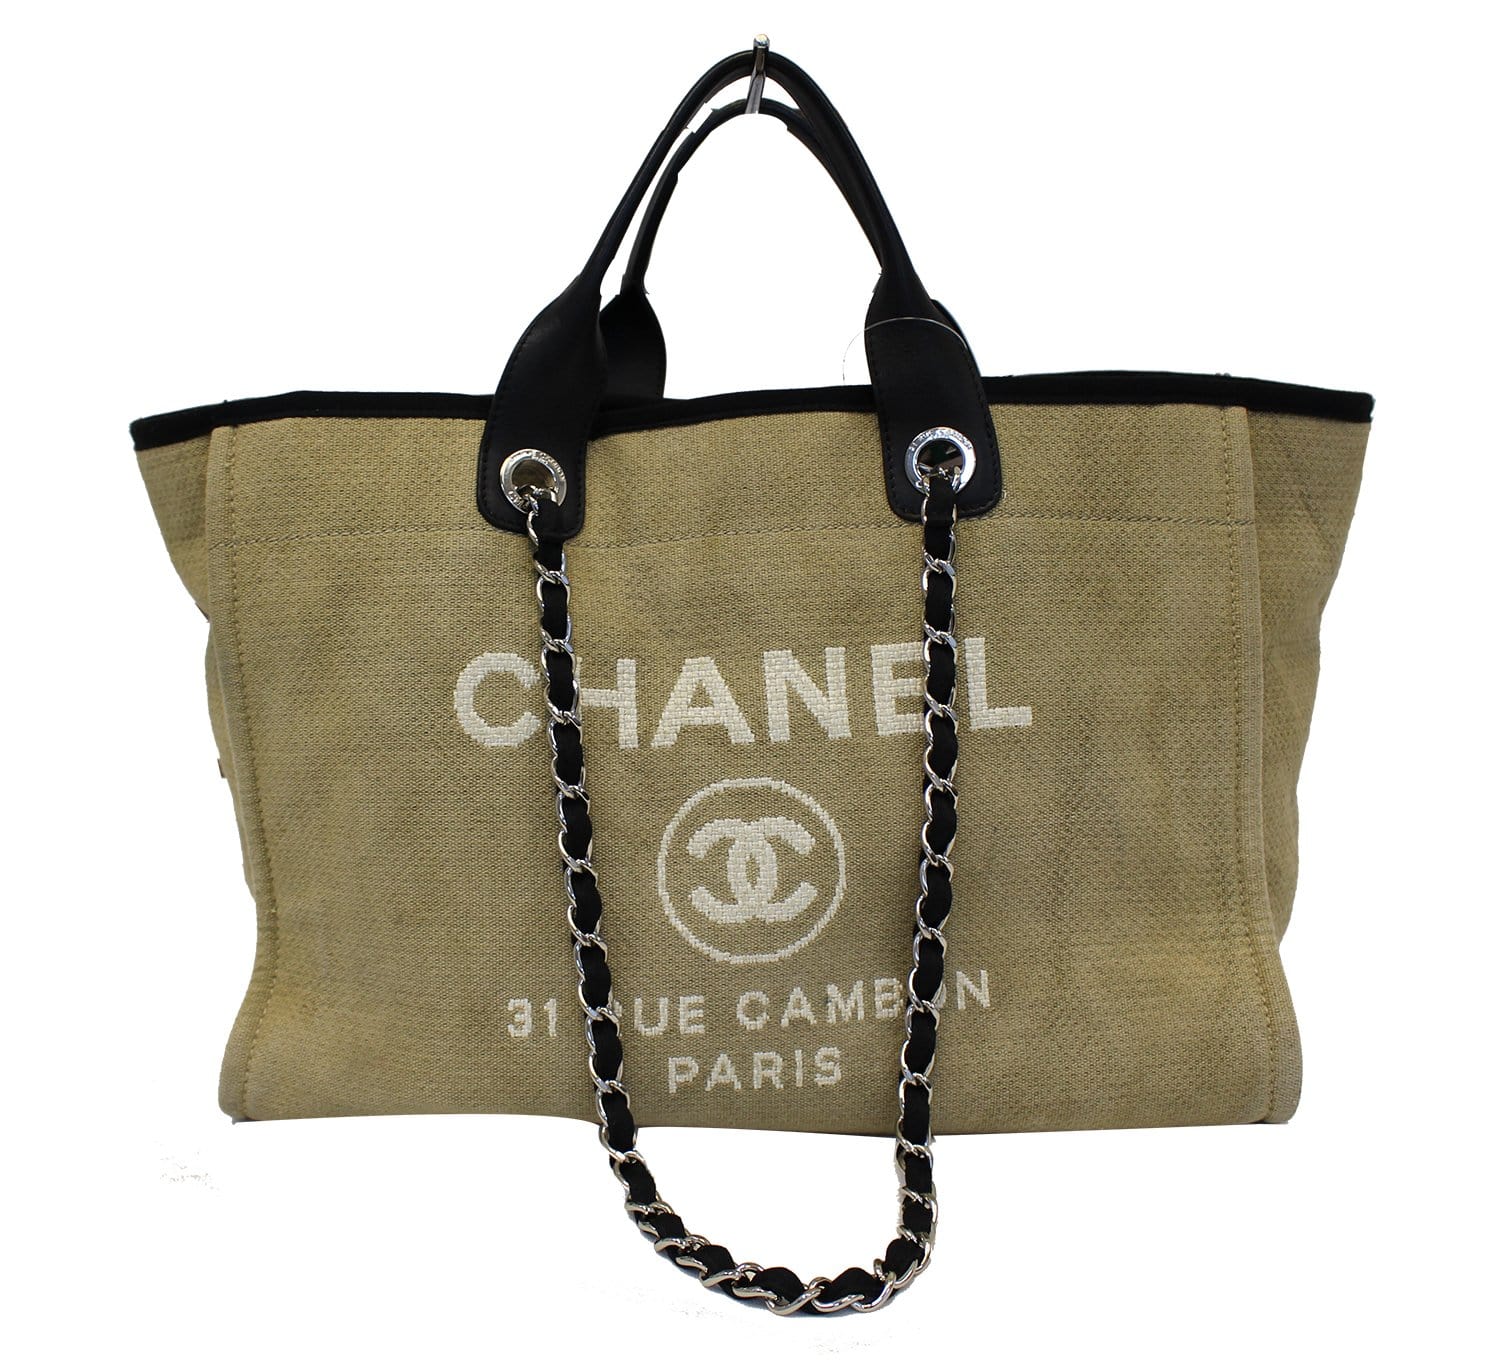 Chanel Large Deauville Shopping Bag